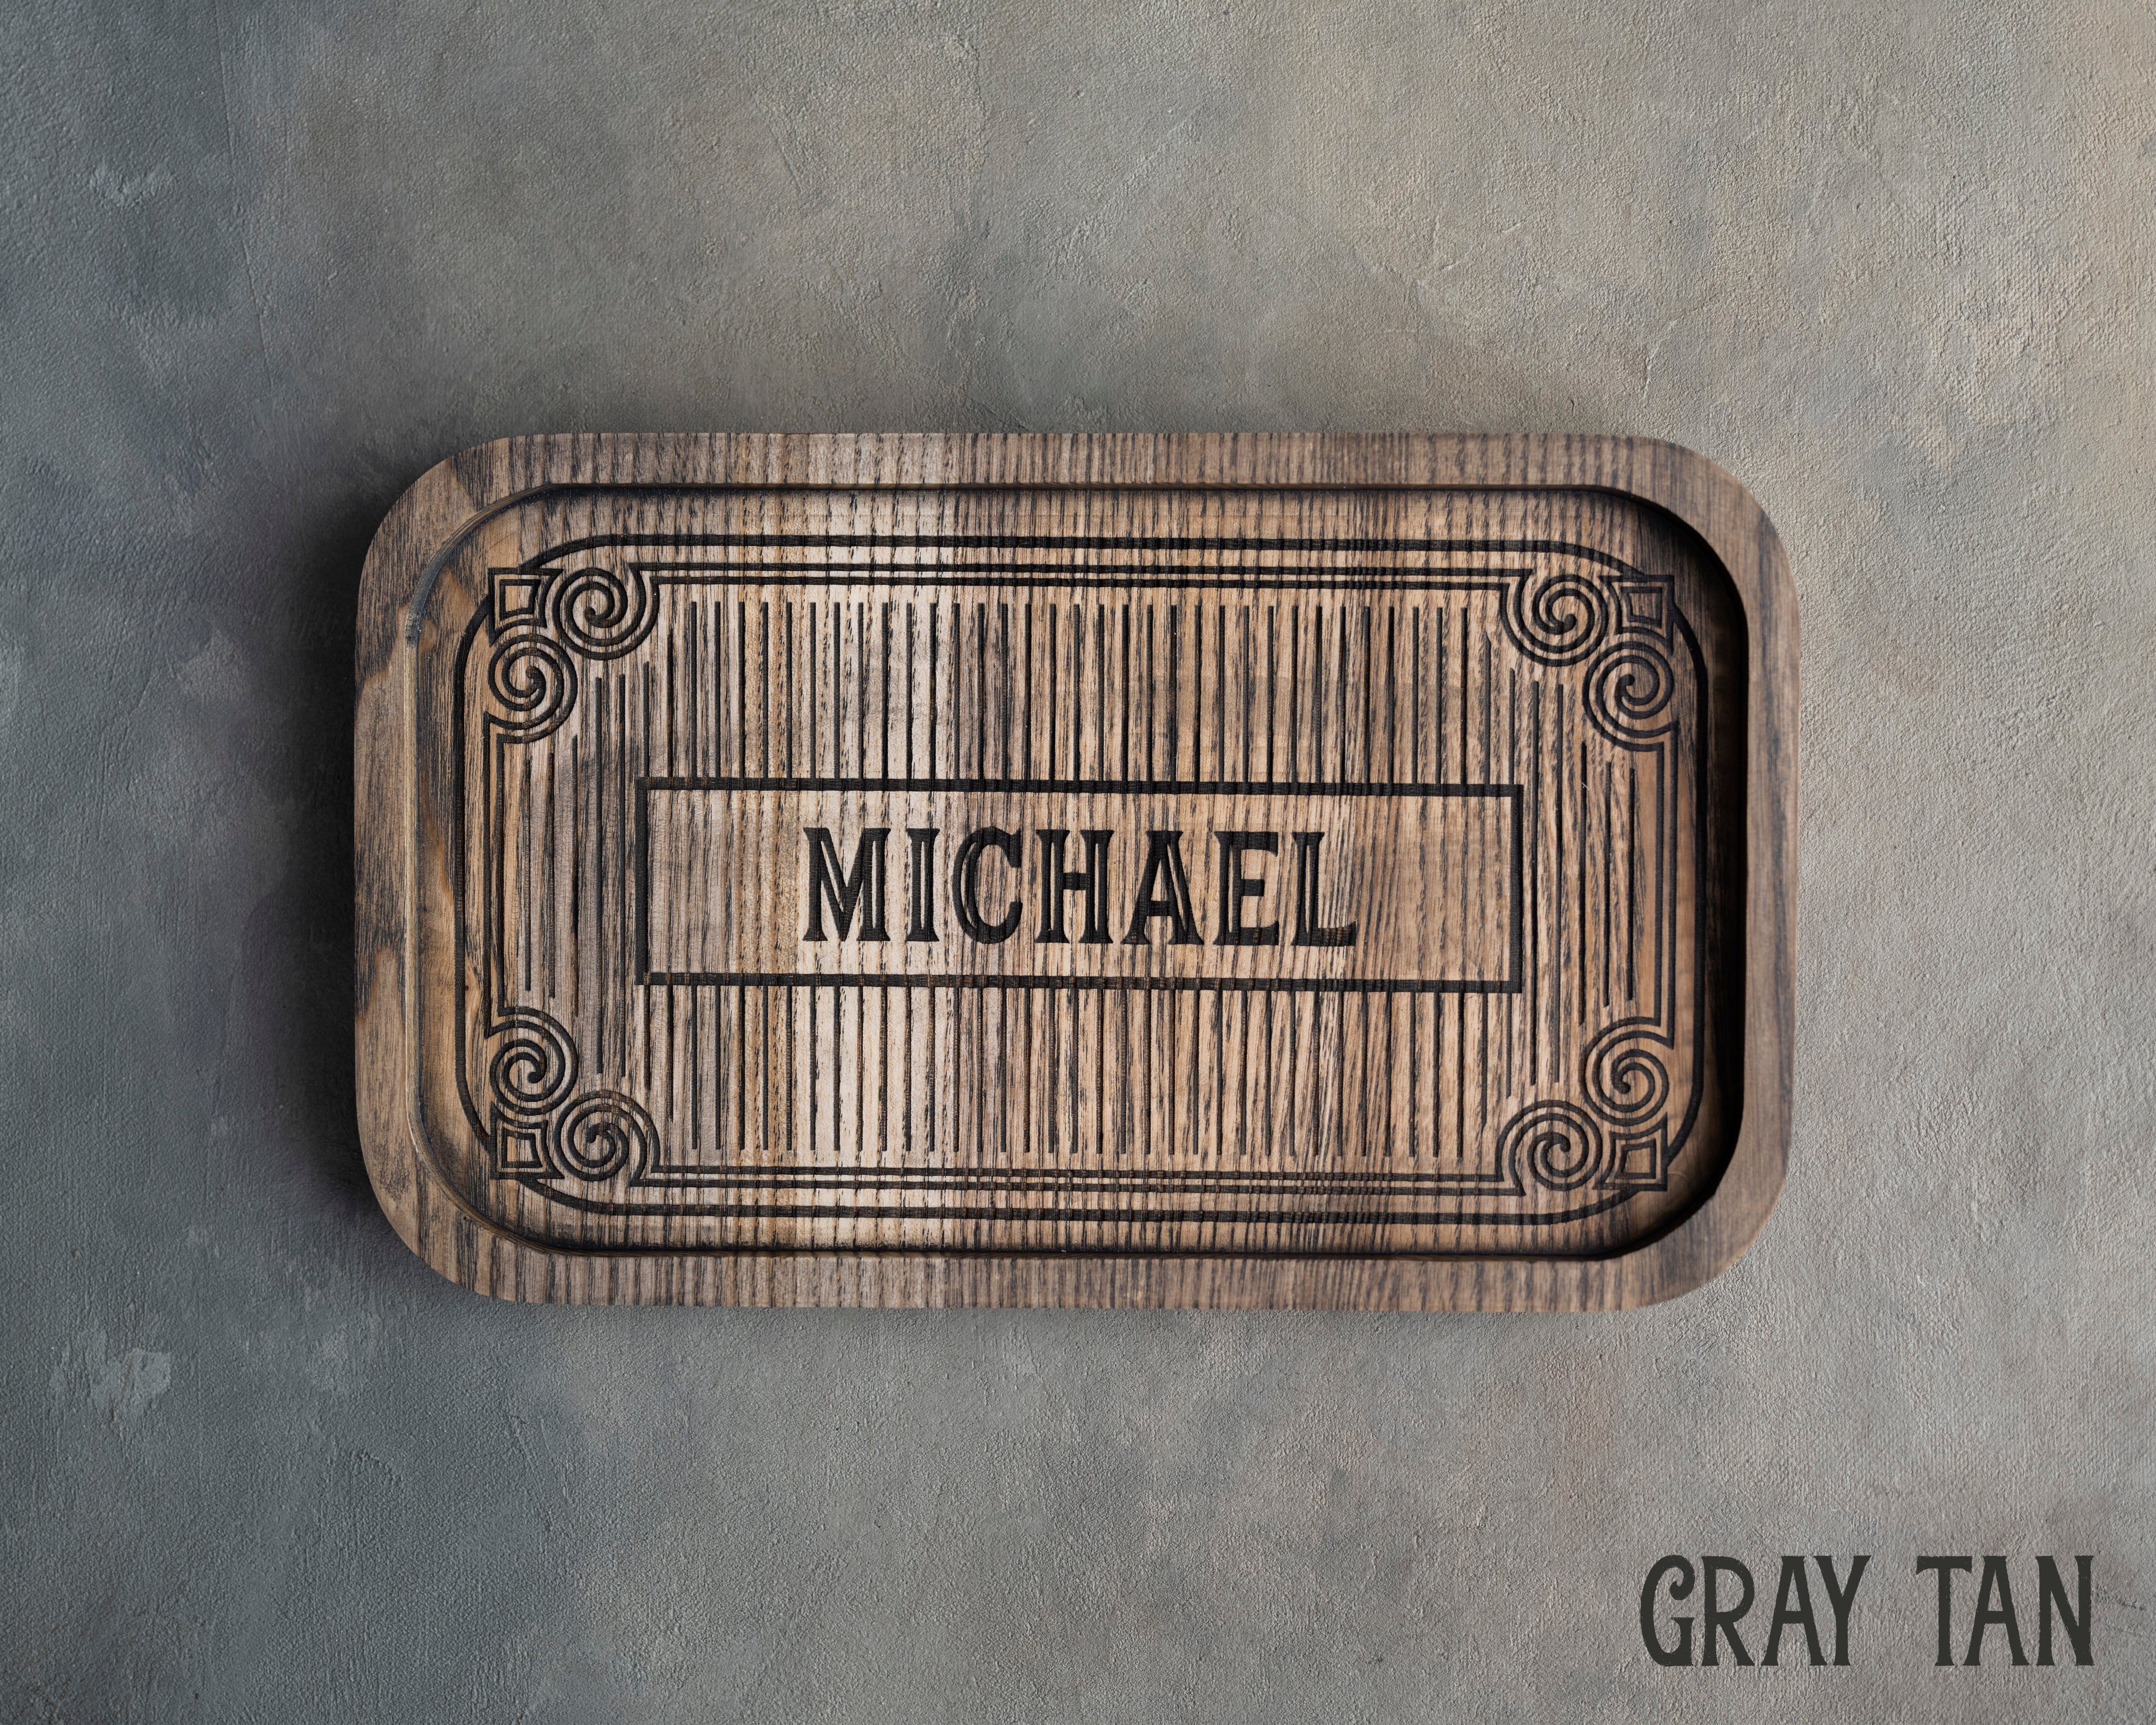 Wooden Tray In Gray Tan